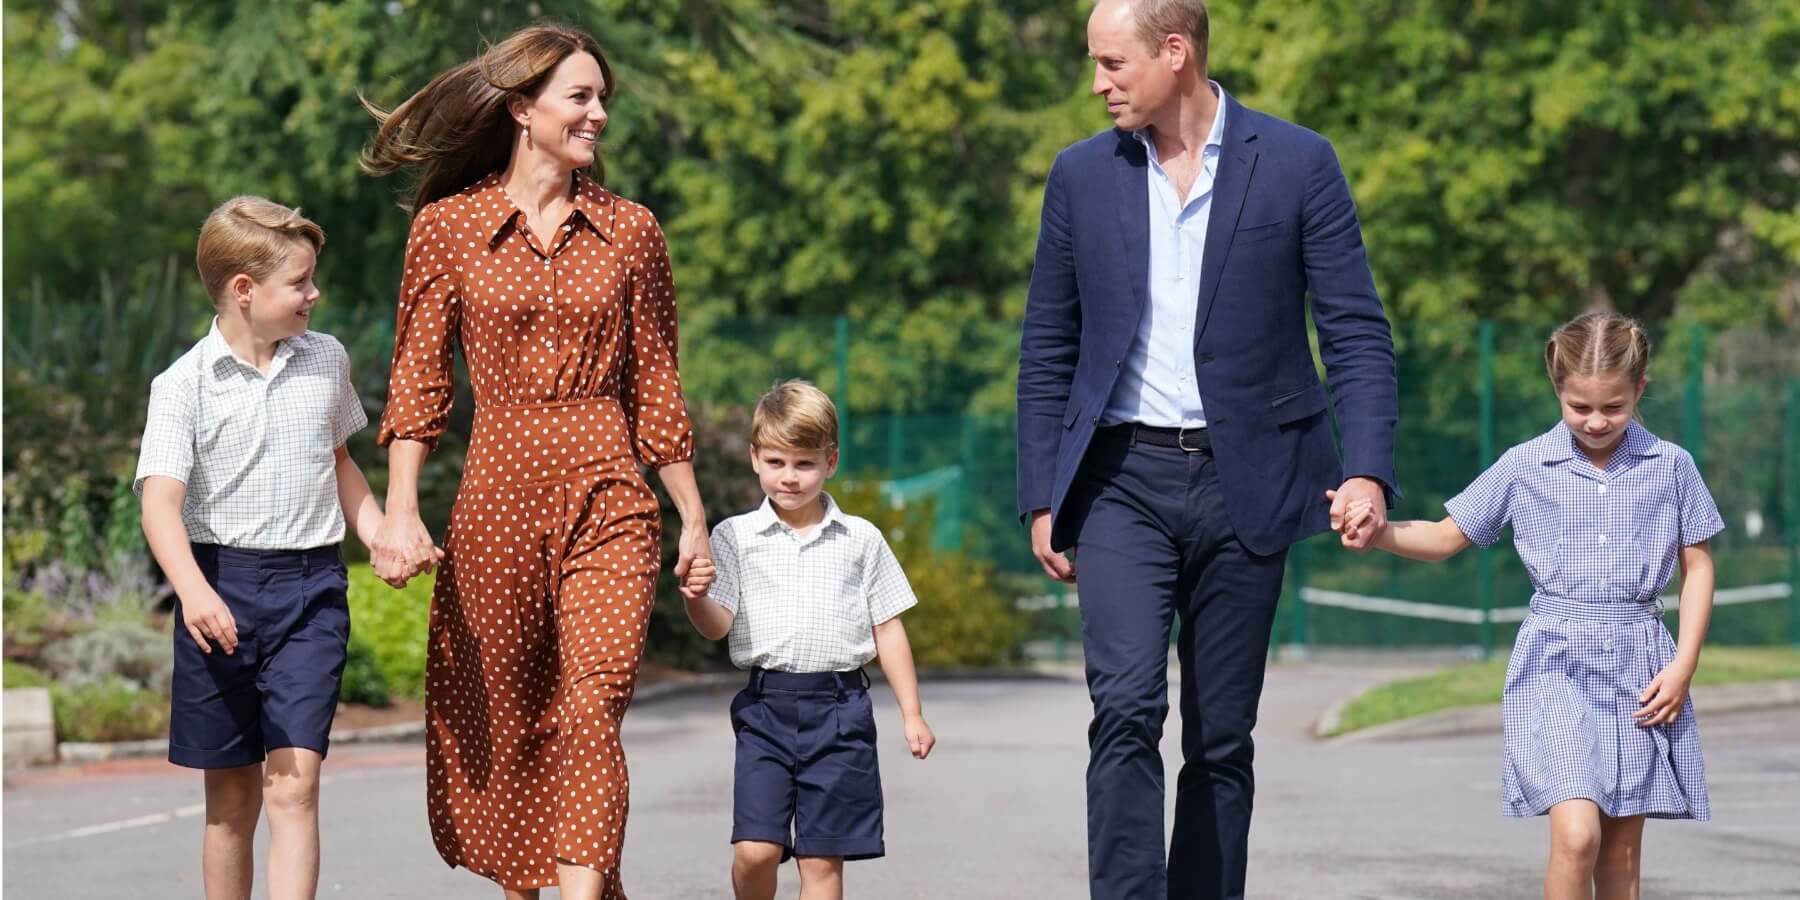 Prince George ‘Eerily Reminiscent’ of Prince William in Wake of Kate Middleton Cancer Announcement: Commentator